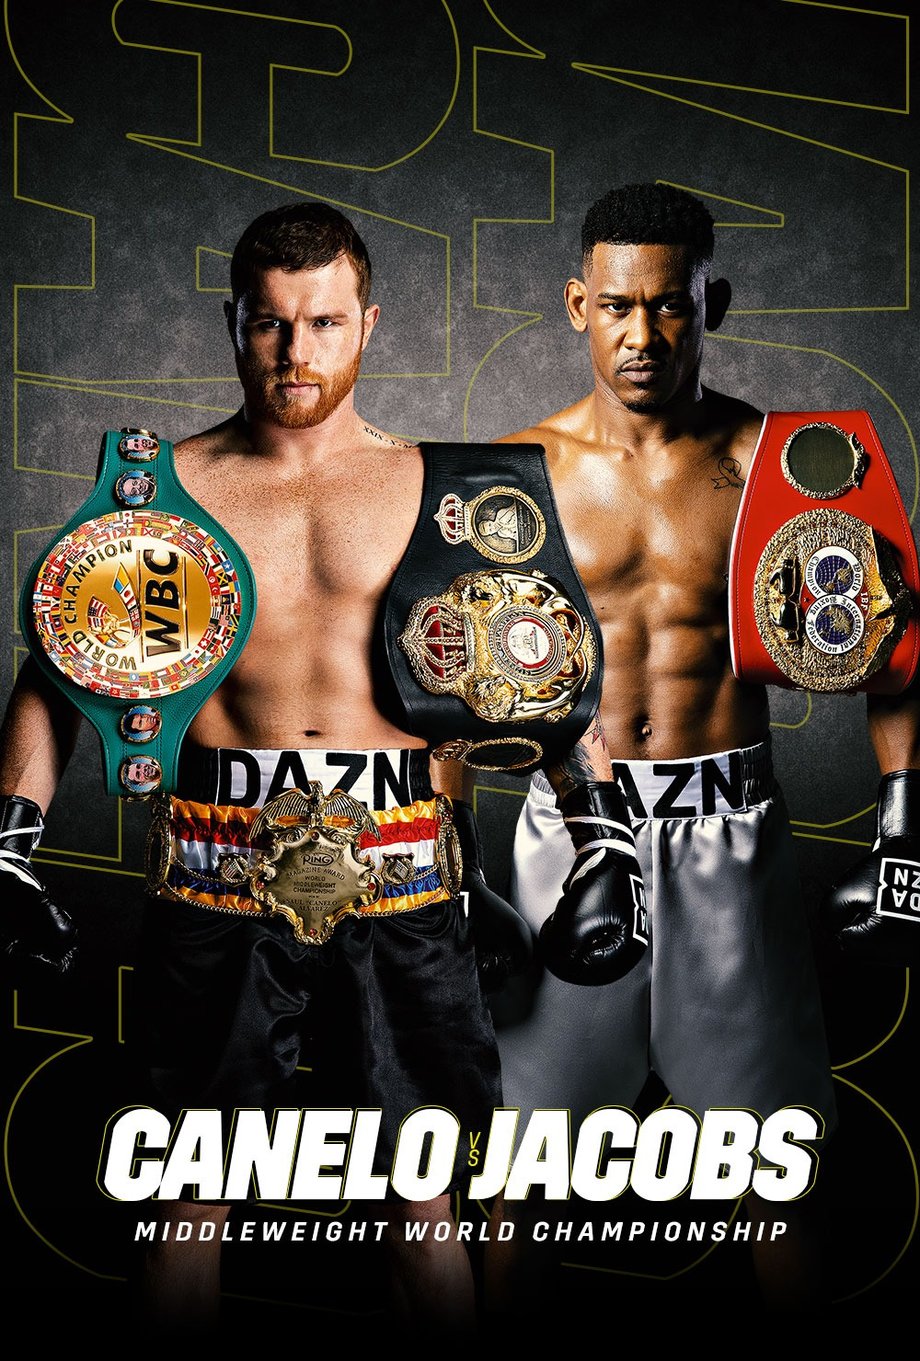 A marketing poster shows Canelo and Jacobs looking straight at the camera with championship belts draped over their shoulders